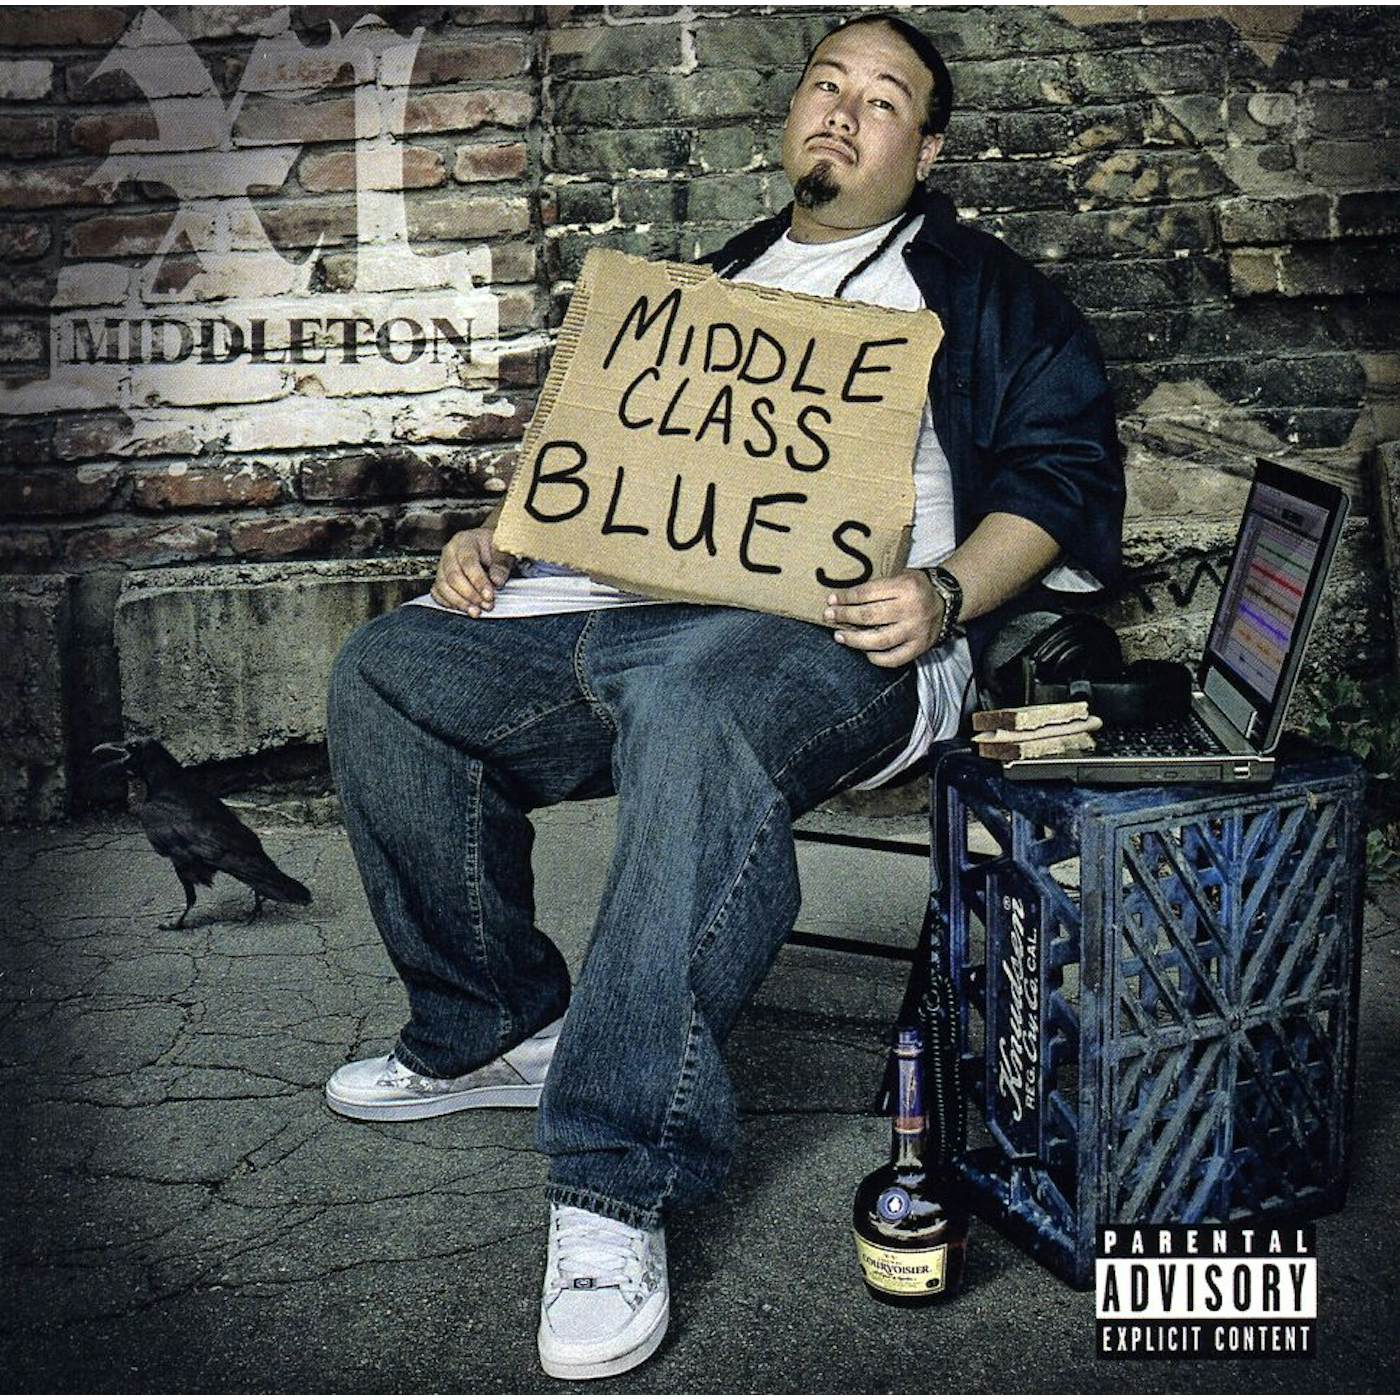 XL Middleton MIDDLE CLASS BLUES CD